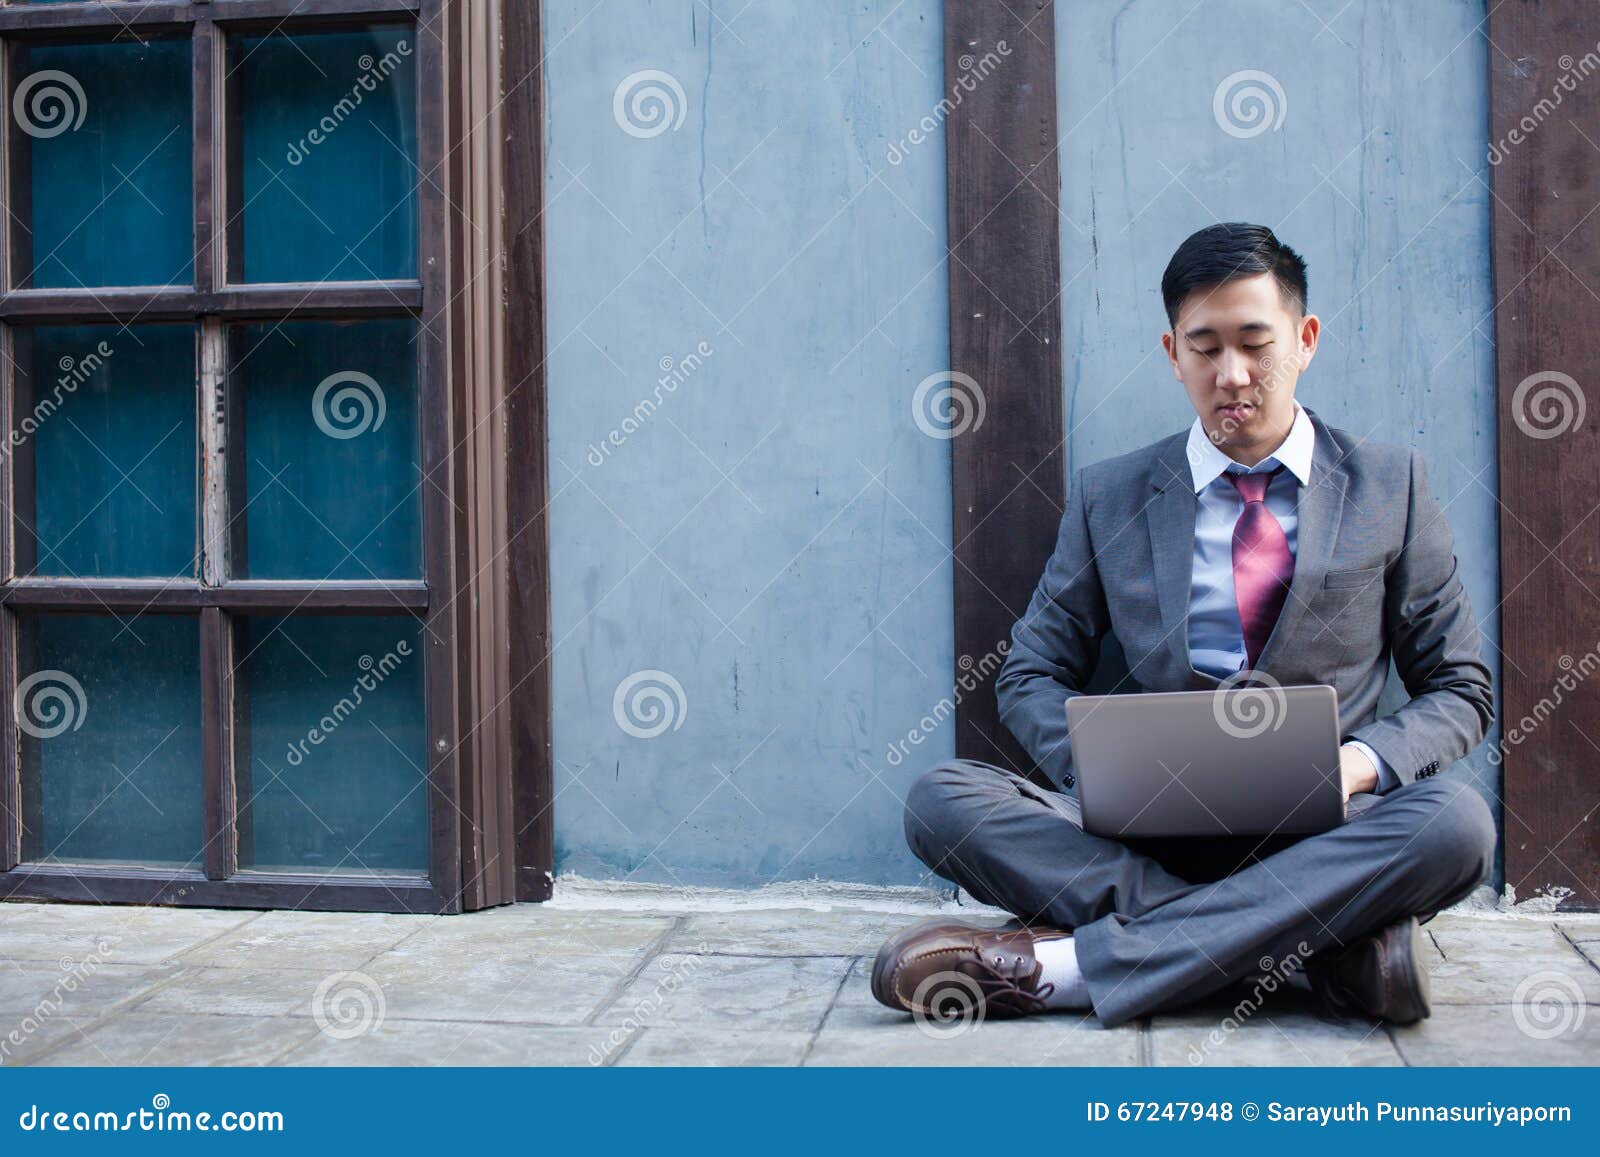 business man working outdoor - work anywhere concept